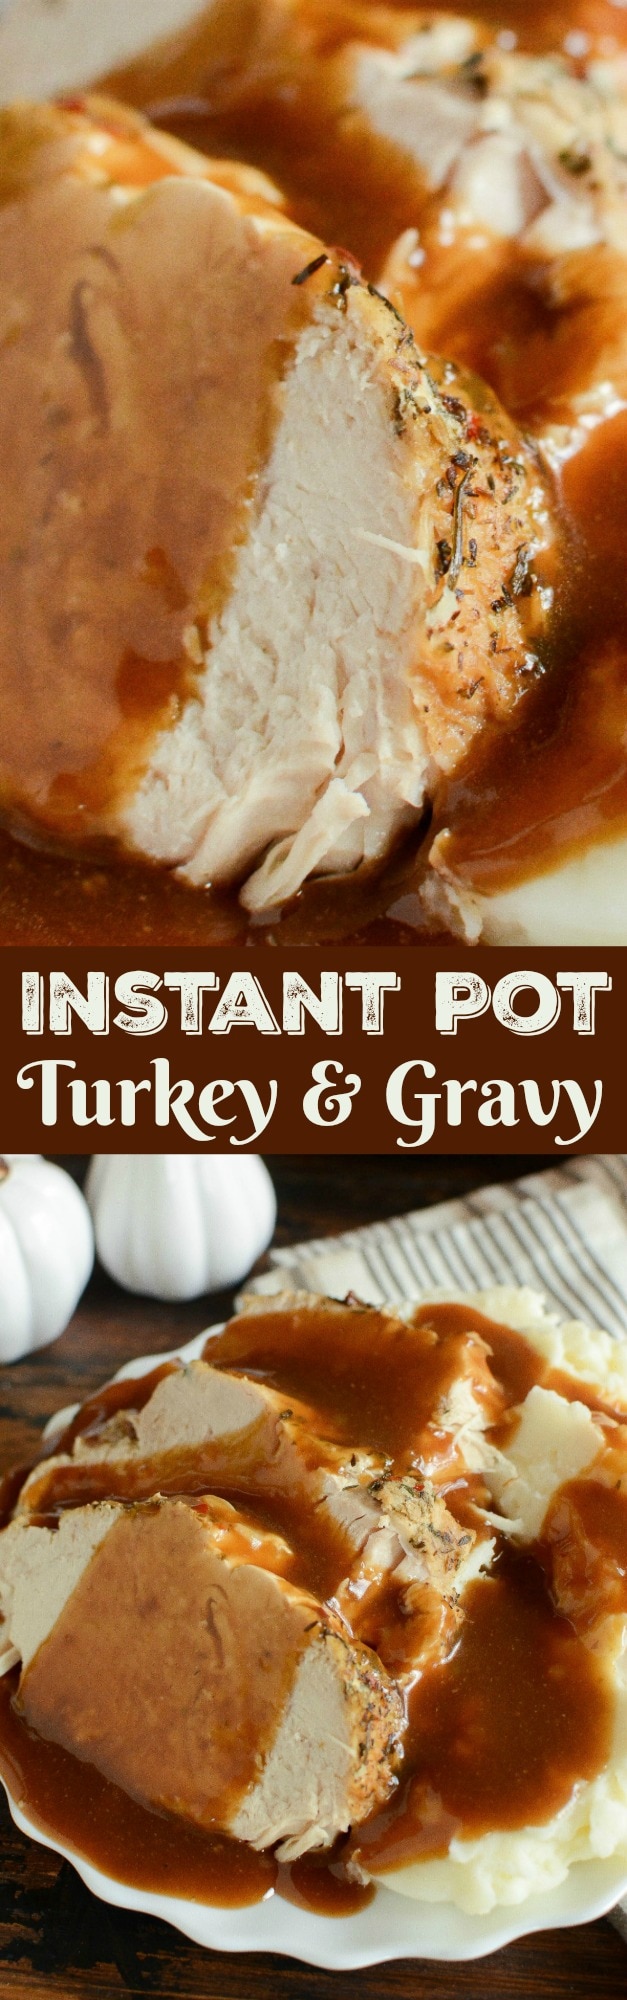 Instant Pot Turkey and Gravy: don't wait for Thanksgiving, make a super moist, one-pot turkey and gravy dinner in your instant pot with only 10 minutes of work!